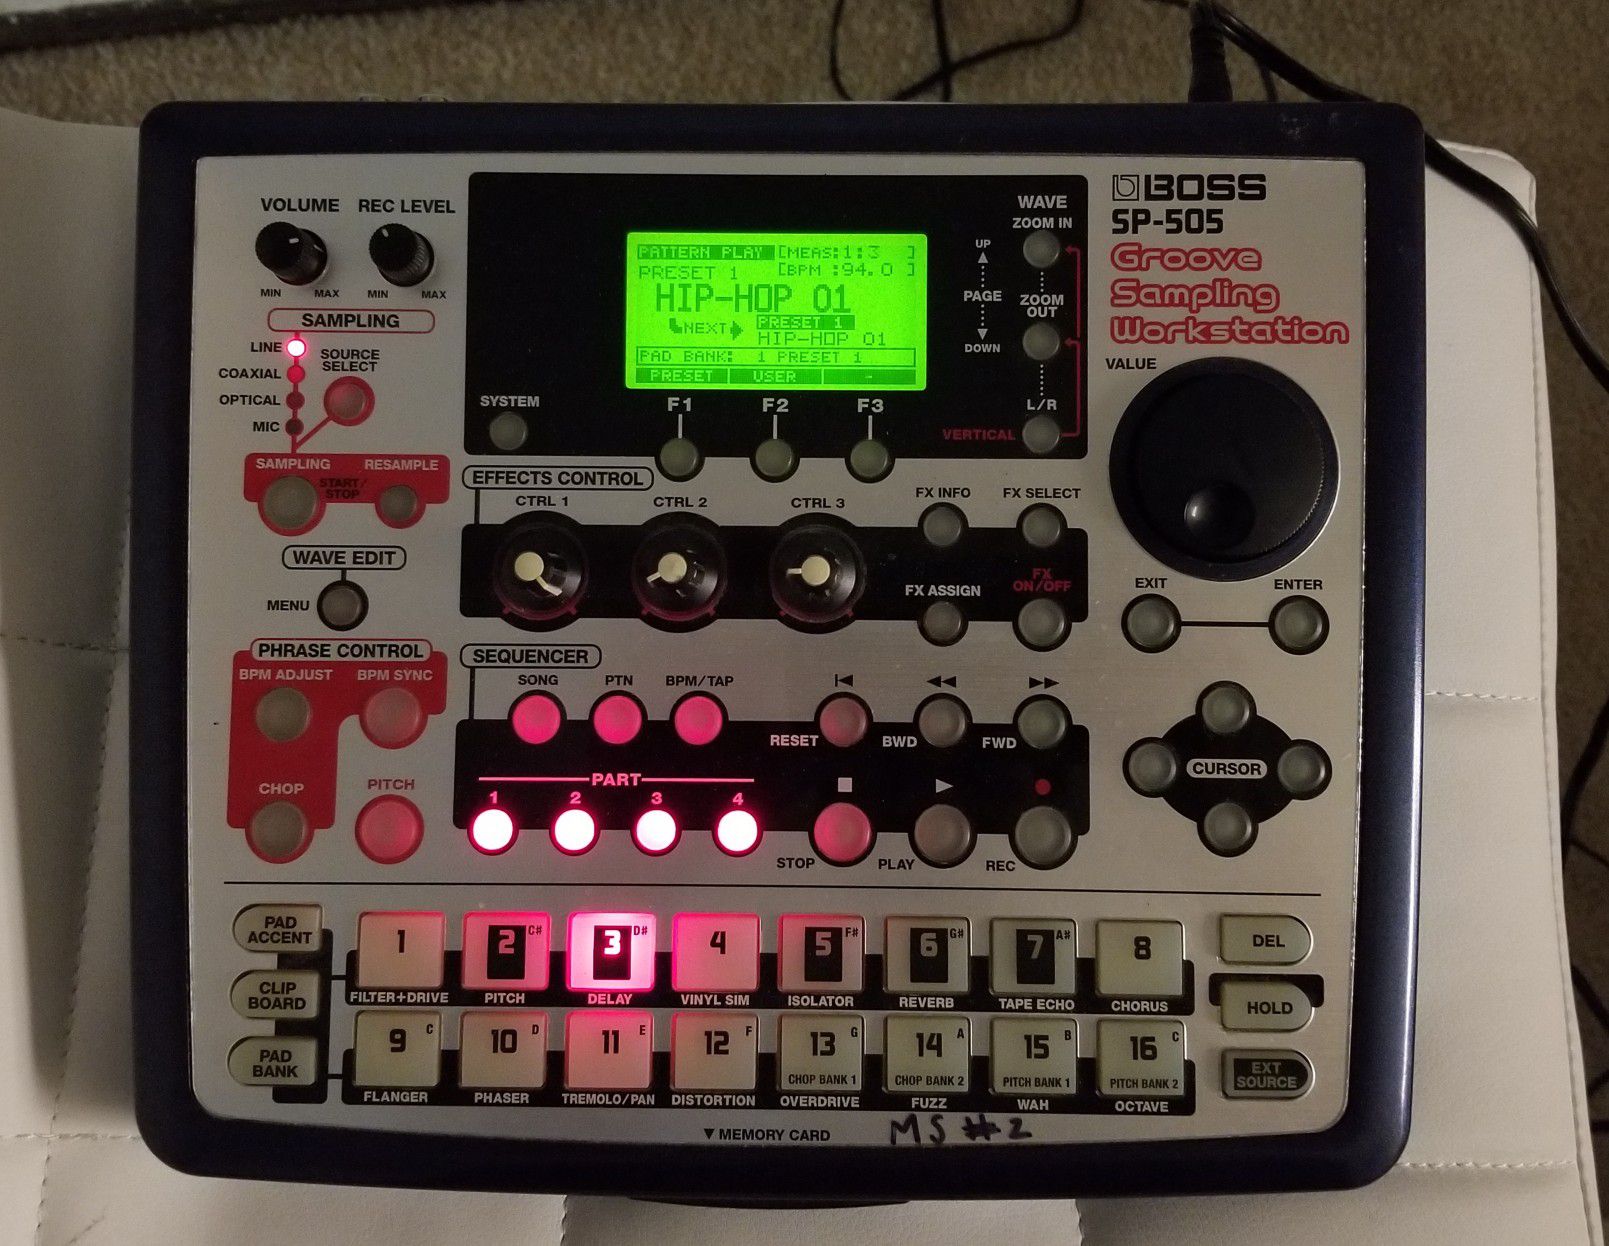 BOSS SP-505 sampler with afghani/hindi samples for Sale in Fremont